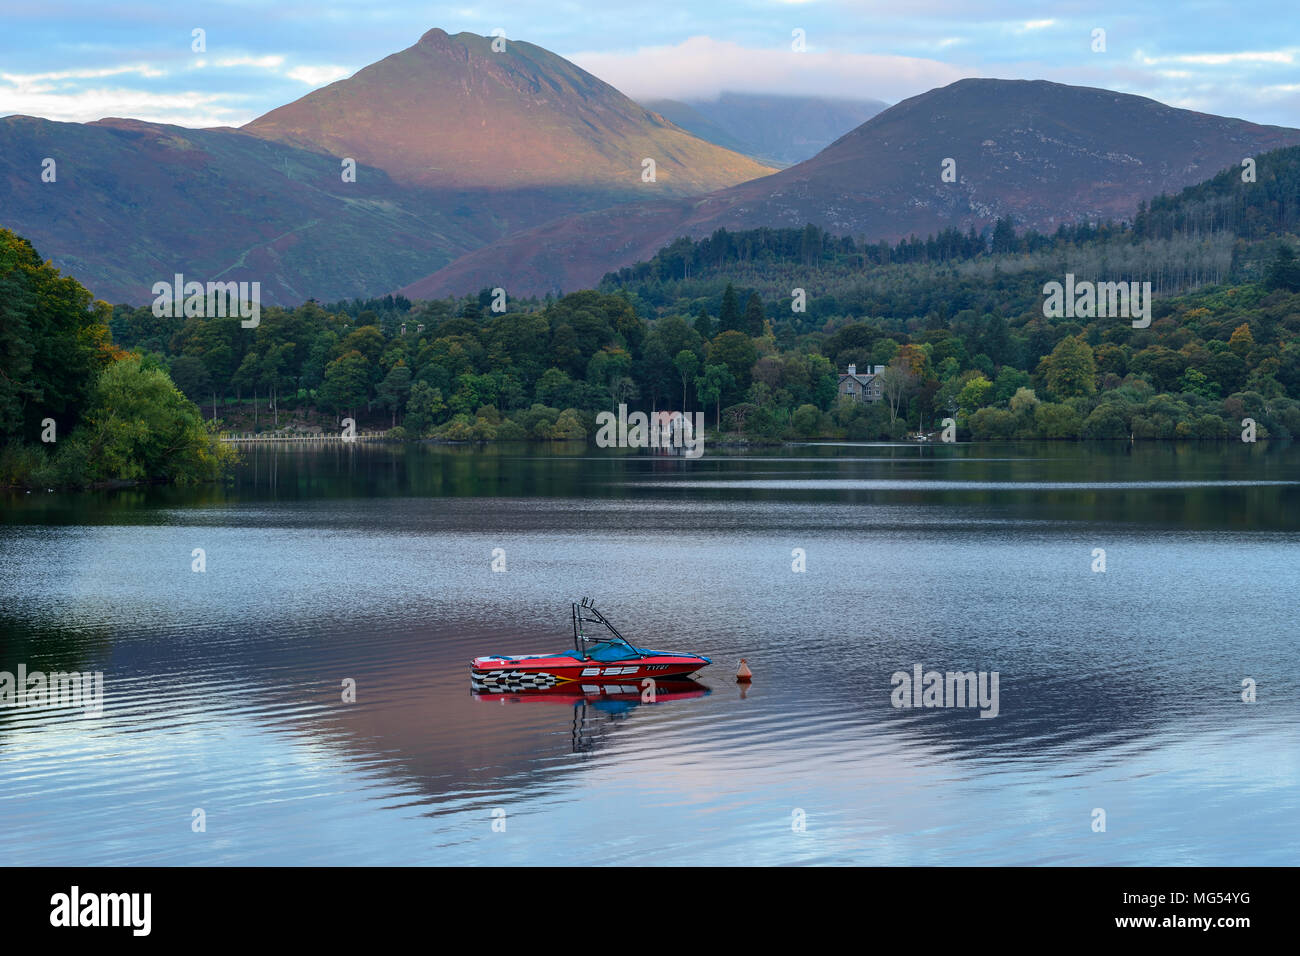 Looking west over Derwent Water from Keswick in the Lake District National Park in Cumbria, England Stock Photo